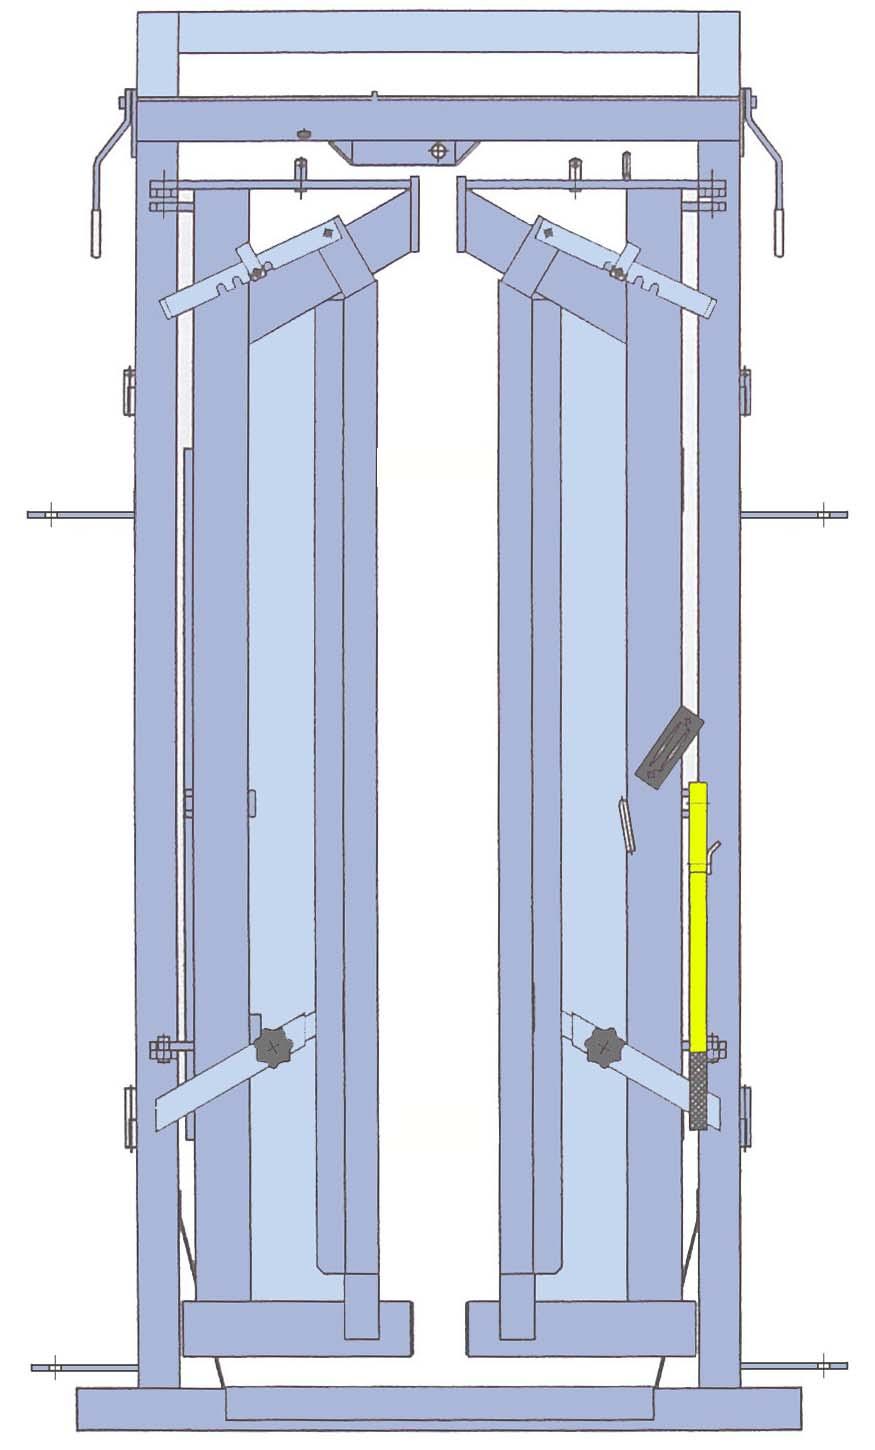 Operating Handle Yoke Width Adjustment Hurdle Lug Hurdle Lug Lock Screws Assist Handle (can be fitted to opposite Side) Hurdle Lug Hurdle Lug Fig 15 To release the animal pull the control lever